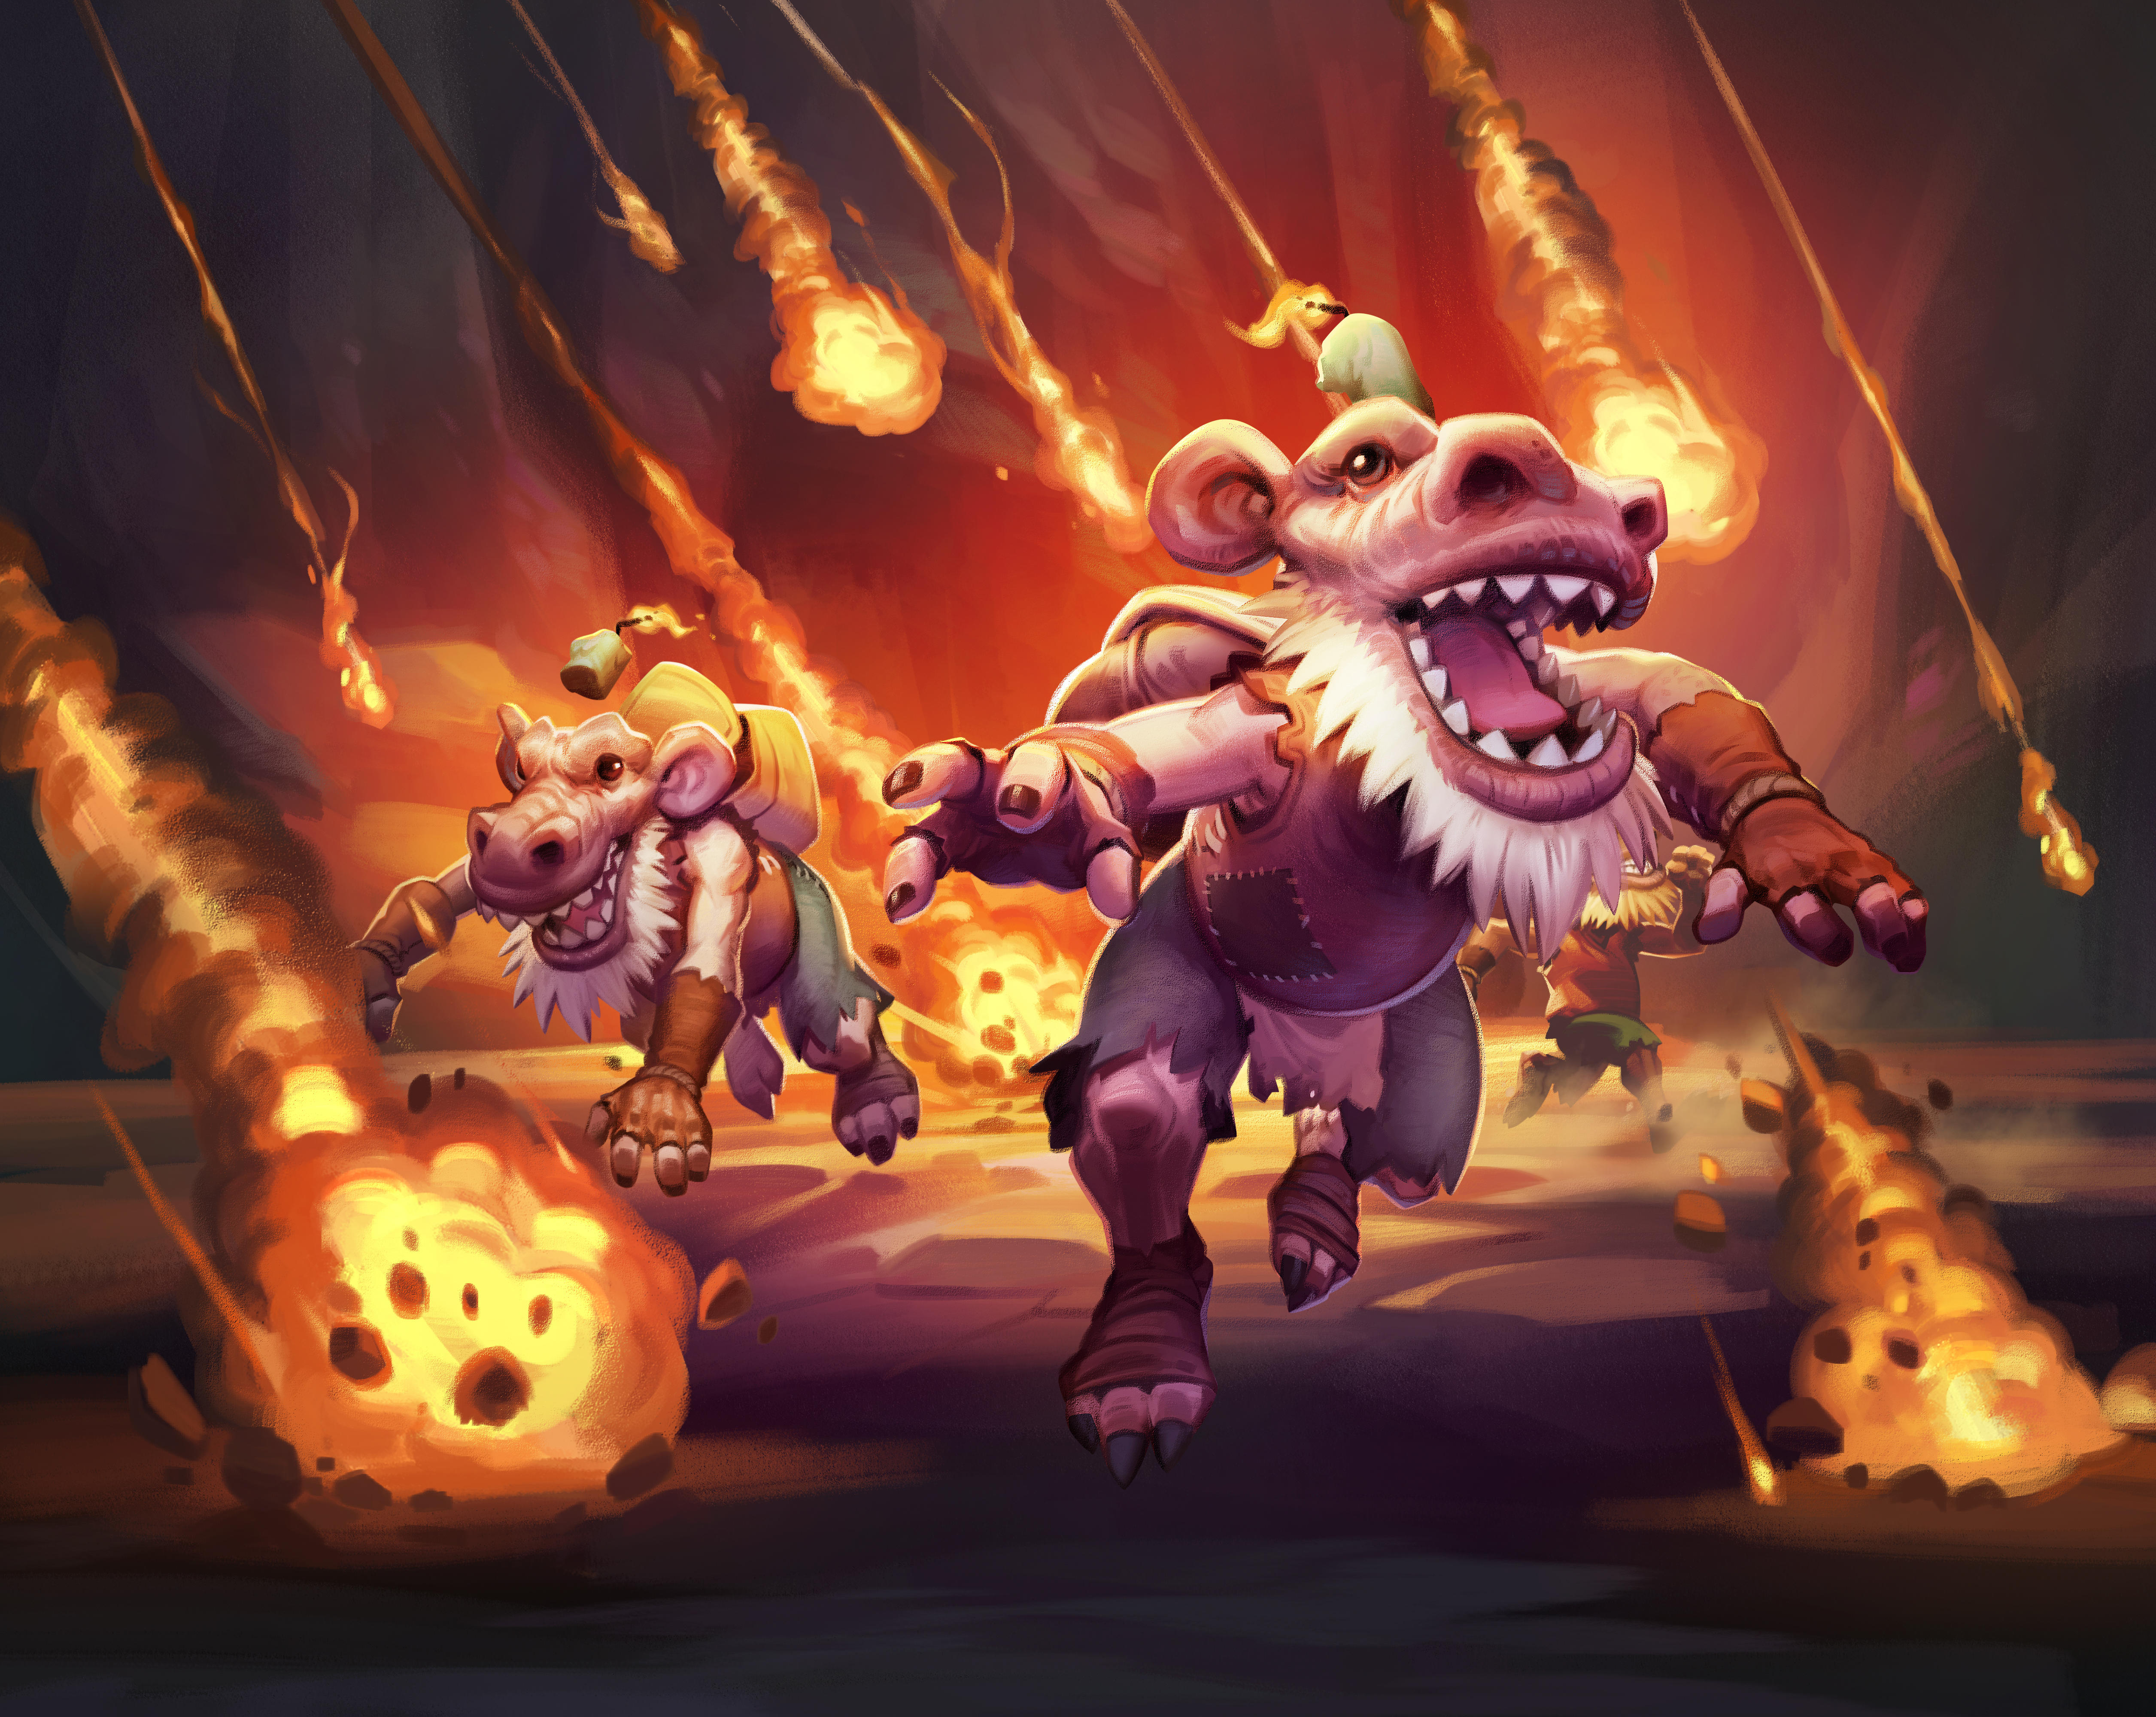 General 5022x4000 Hearthstone: Heroes of Warcraft Hearthstone: Kobolds and Catacombs PC gaming video games kobolds